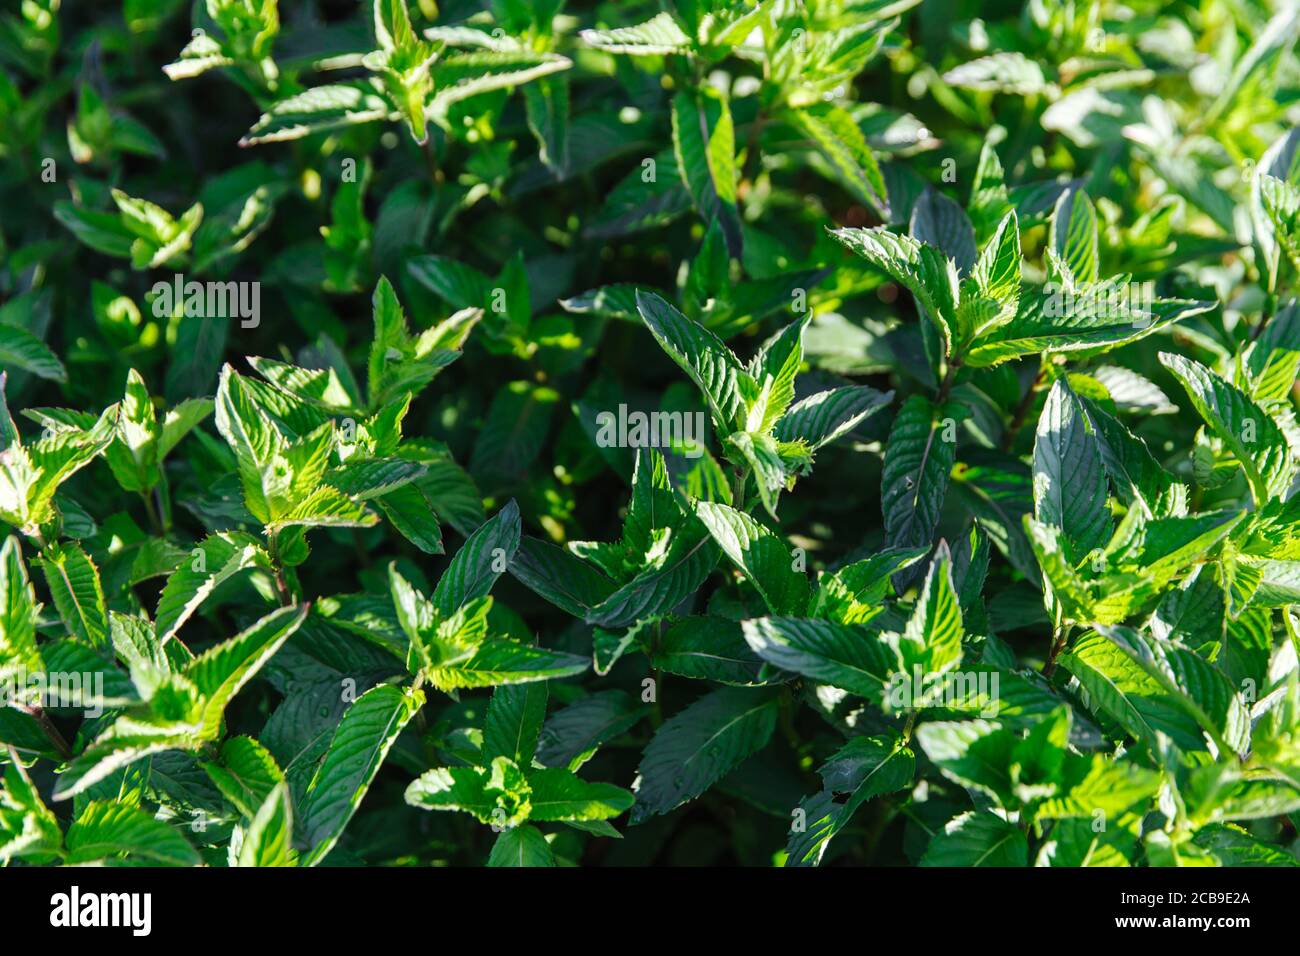 Green juicy fragrant mint. Organic mint cultivation. Mint in the sunlight Stock Photo